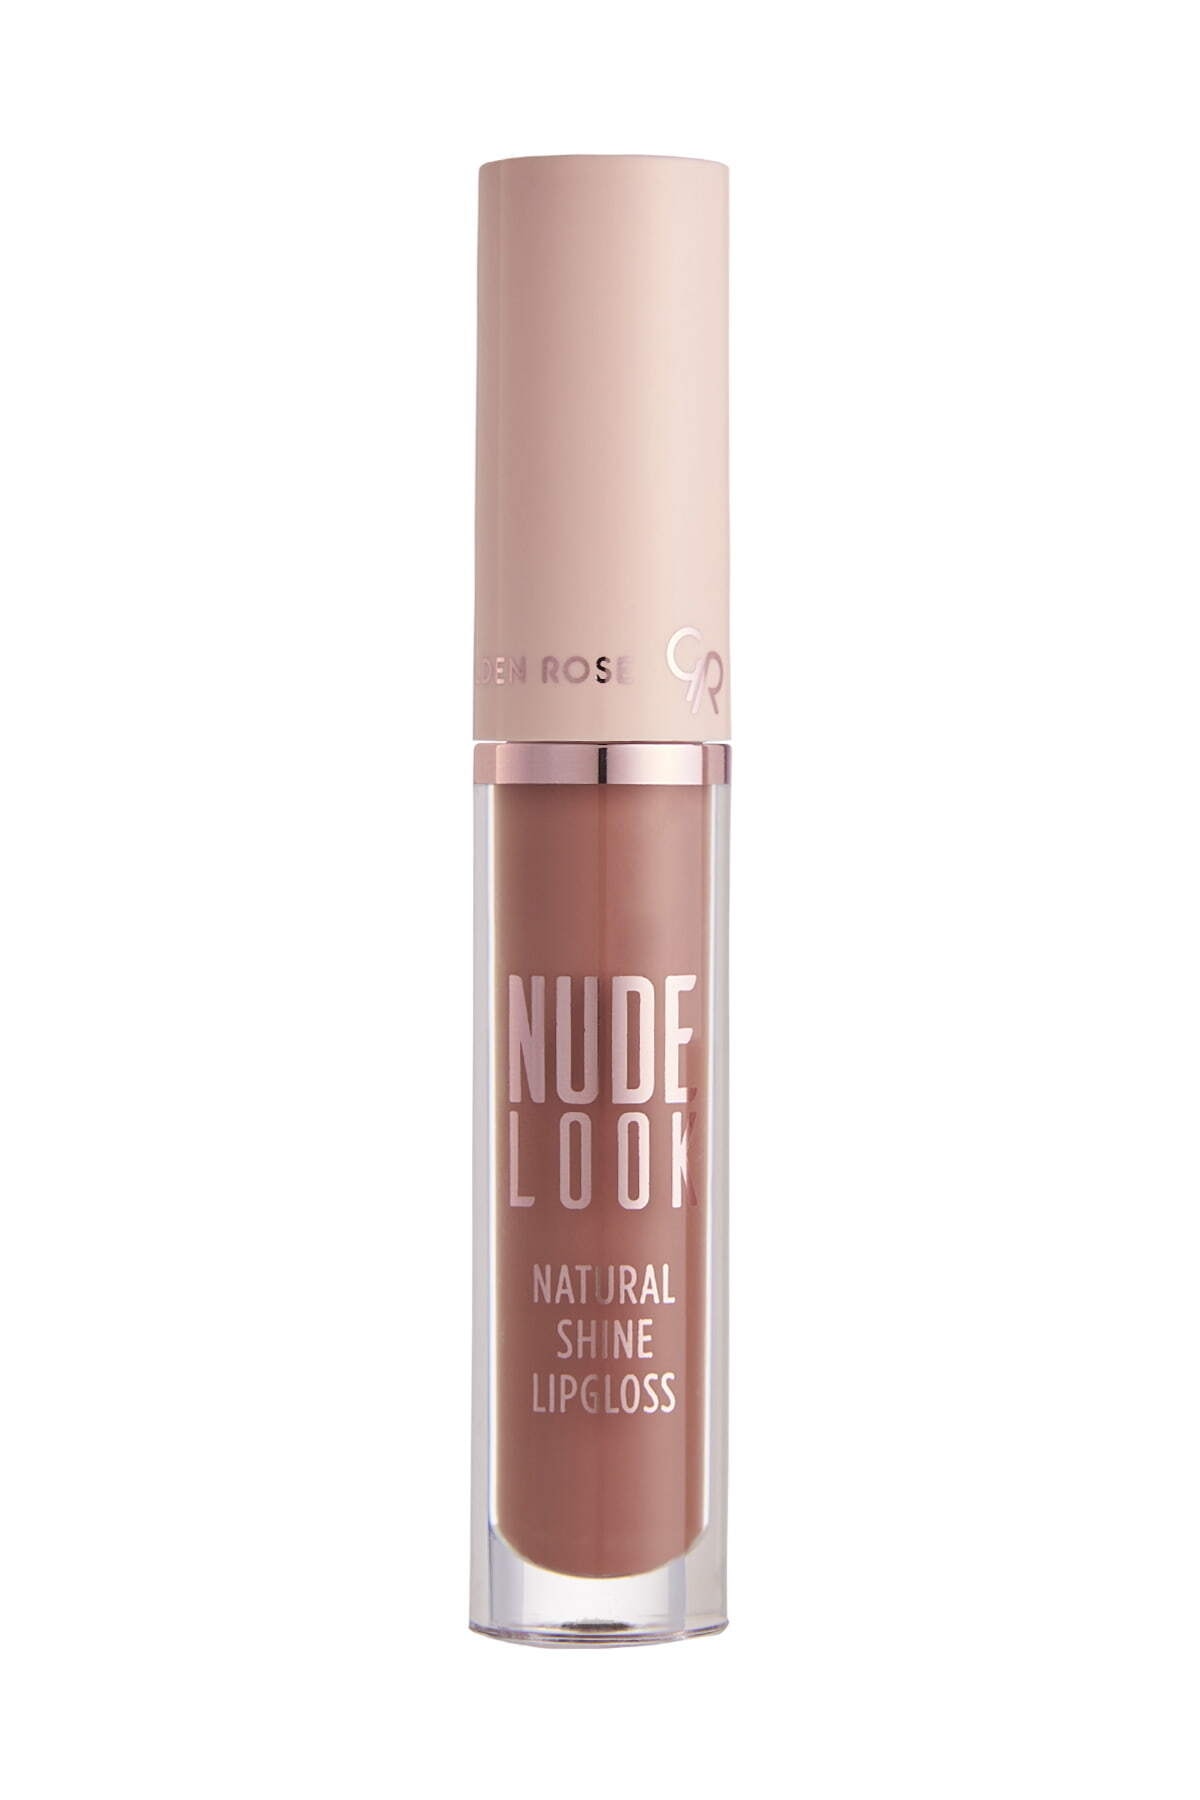 Golden Rose Likit Mat Ruj - Nude Look Velvety Matte Lipcolor No: 01 Just Nude 8691190967444